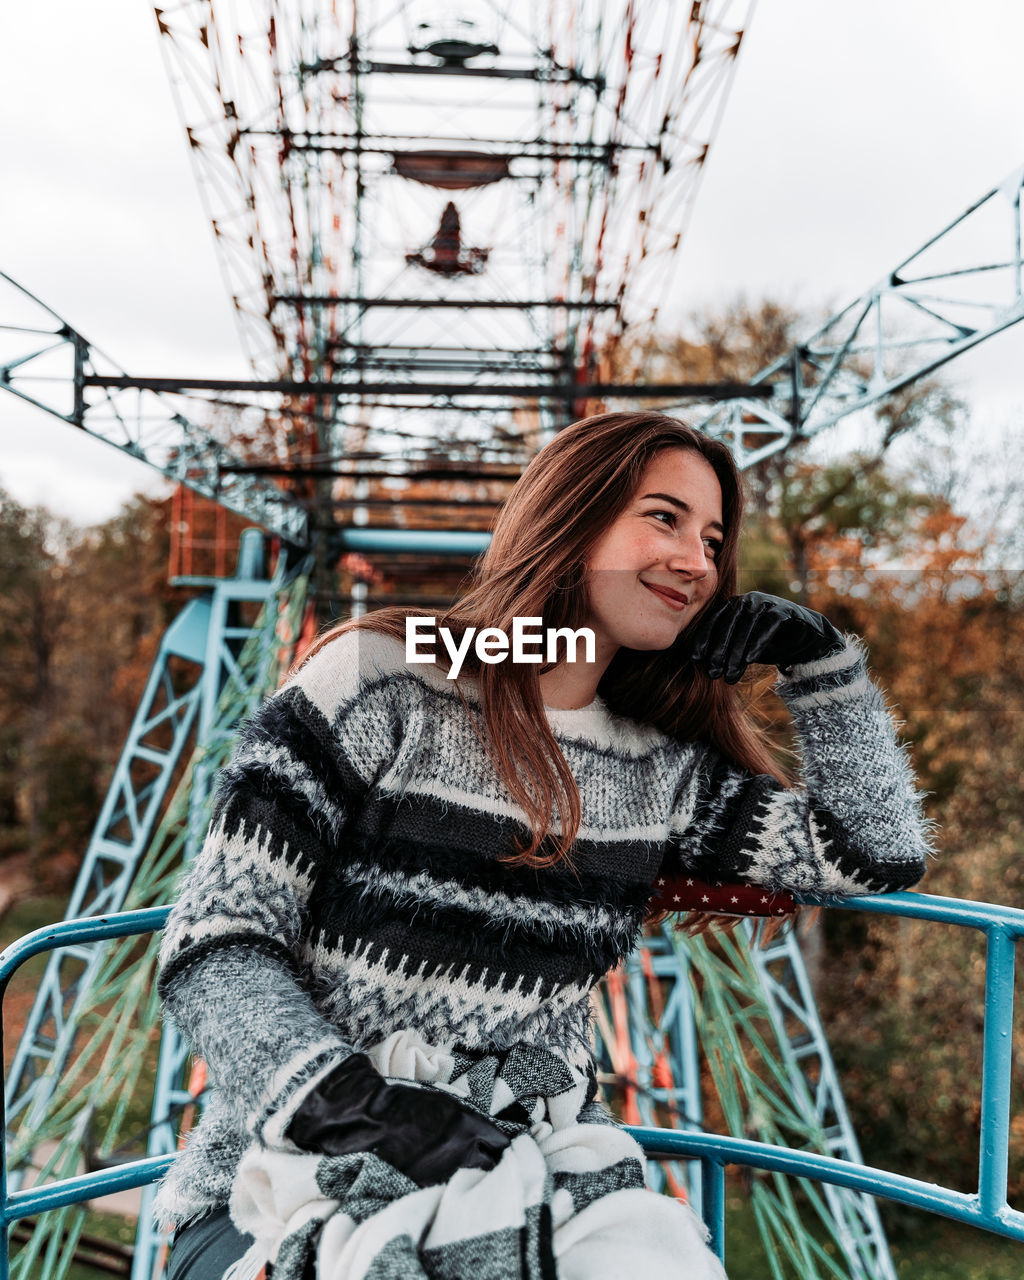 Smiling young woman sitting on ferris wheel